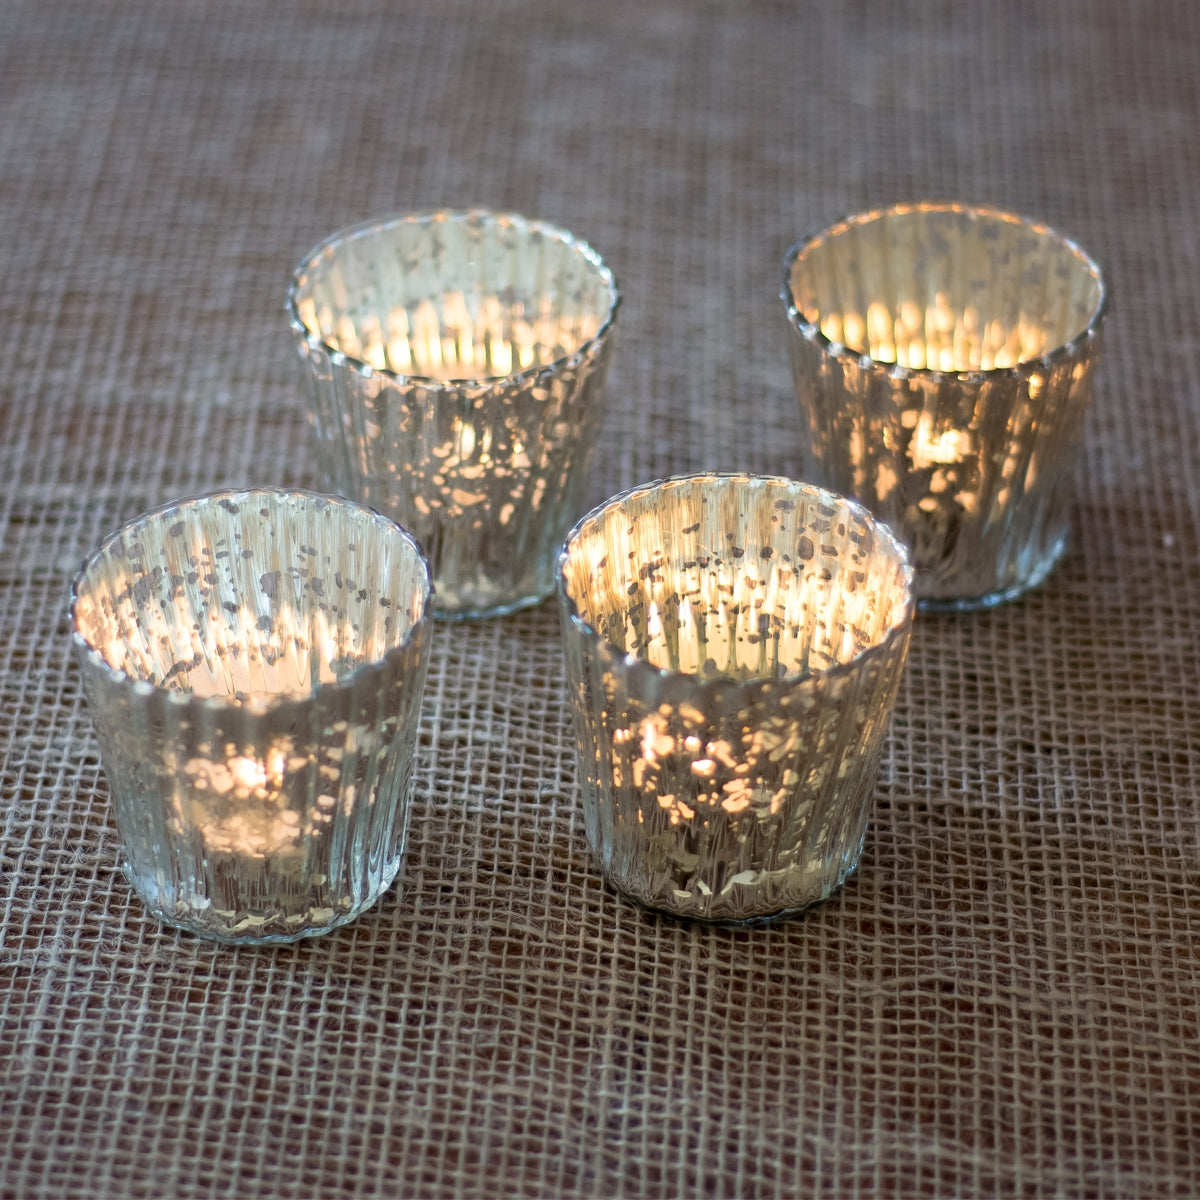 24 Pack | Vintage Mercury Glass Candle Holders (3-Inch, Caroline Design, Vertical Motif, Silver) - For use with Tea Lights - Home Decor, Parties and Wedding Decorations - PaperLanternStore.com - Paper Lanterns, Decor, Party Lights &amp; More